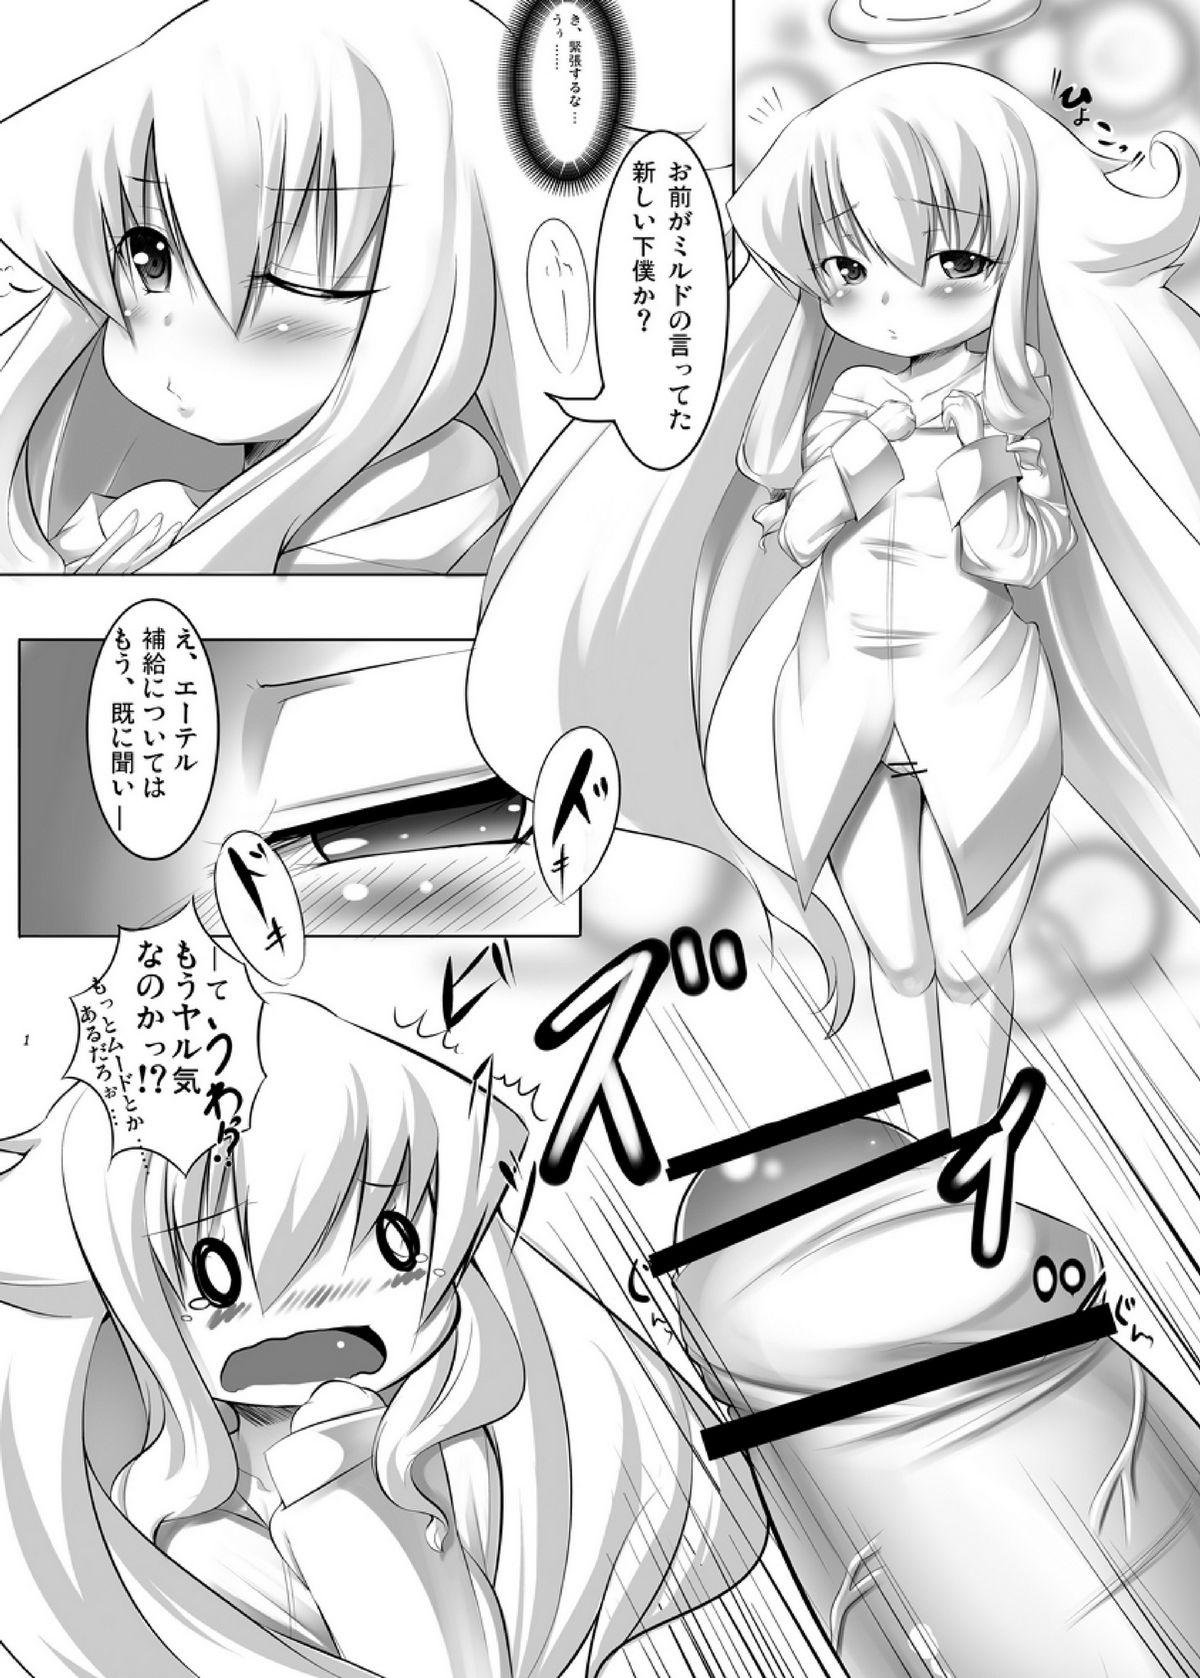 Relax Angelia to no... - Arcana heart Penis - Page 2